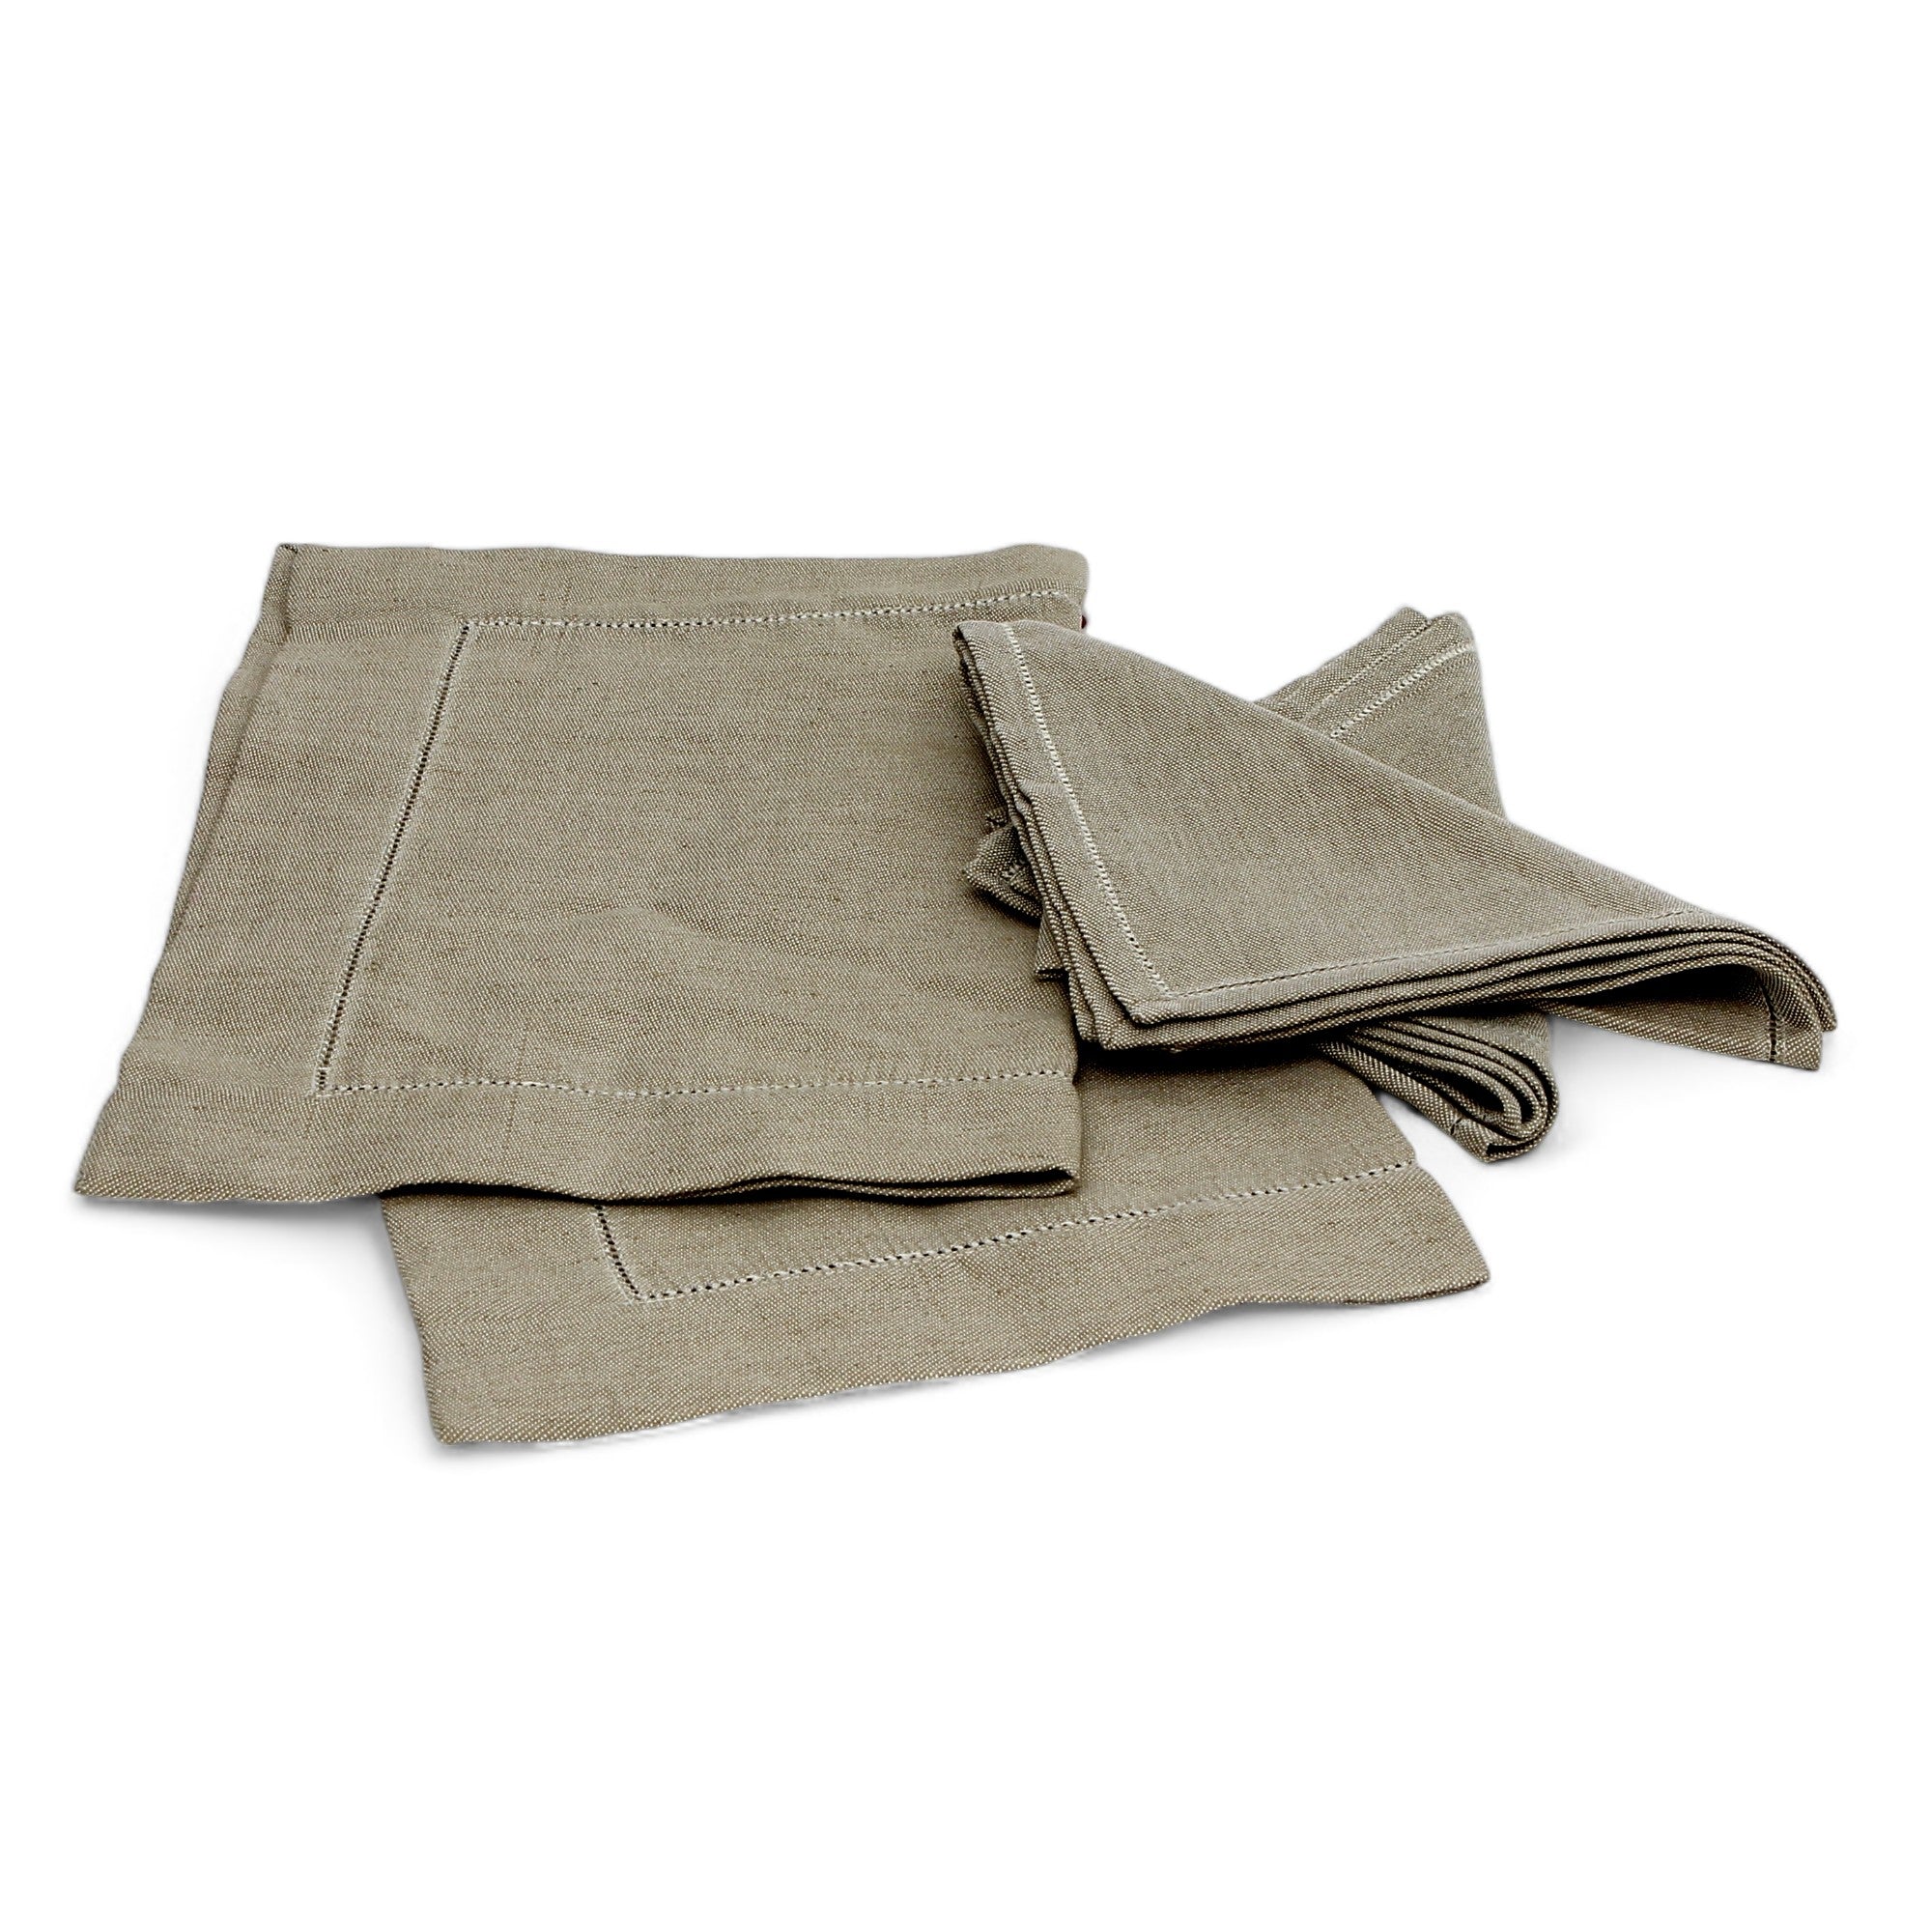 TESSITURE PARDI: Set of TWO Reversible Placemats and TWO Reversible Napkins Dinner Size Large - (60% Linen and 40% Cotton) NATURAL Color